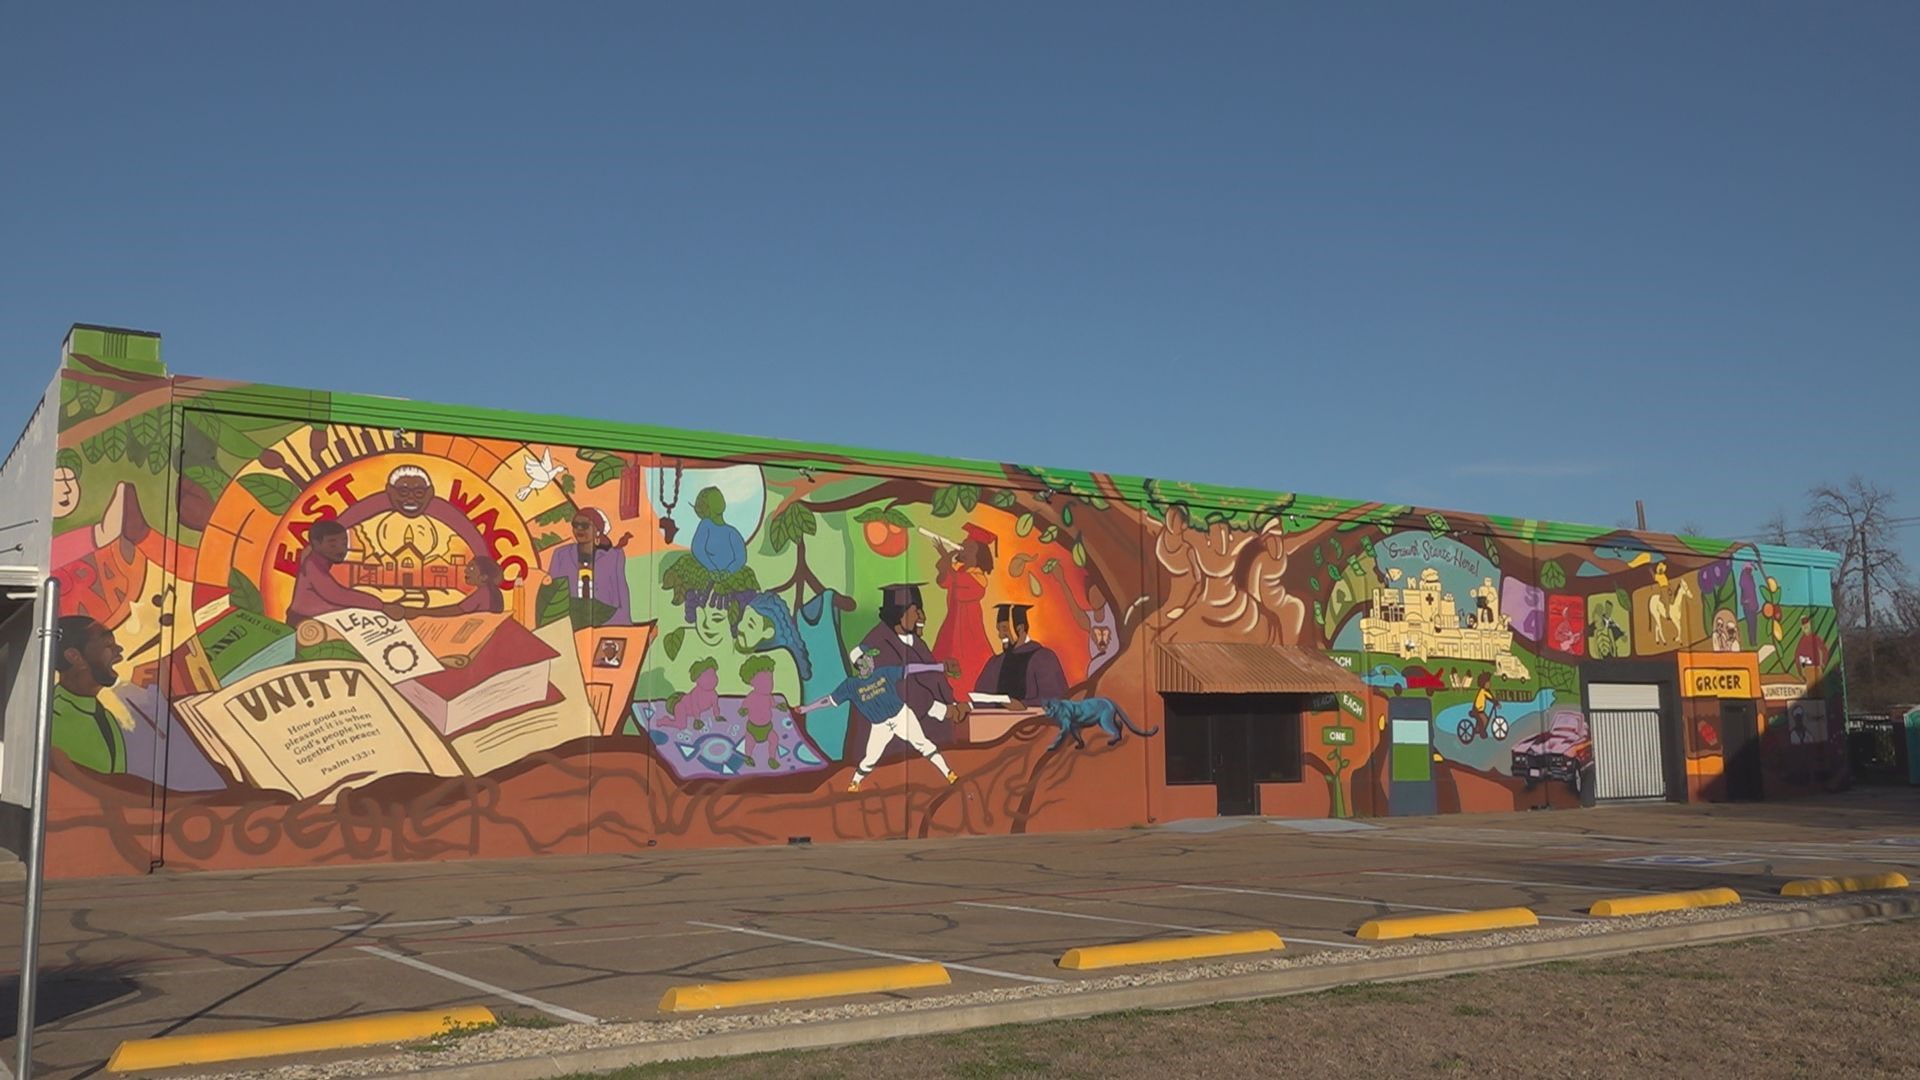 The 'tree of life' mural was created by local artists and students in partnership with Creative Waco.